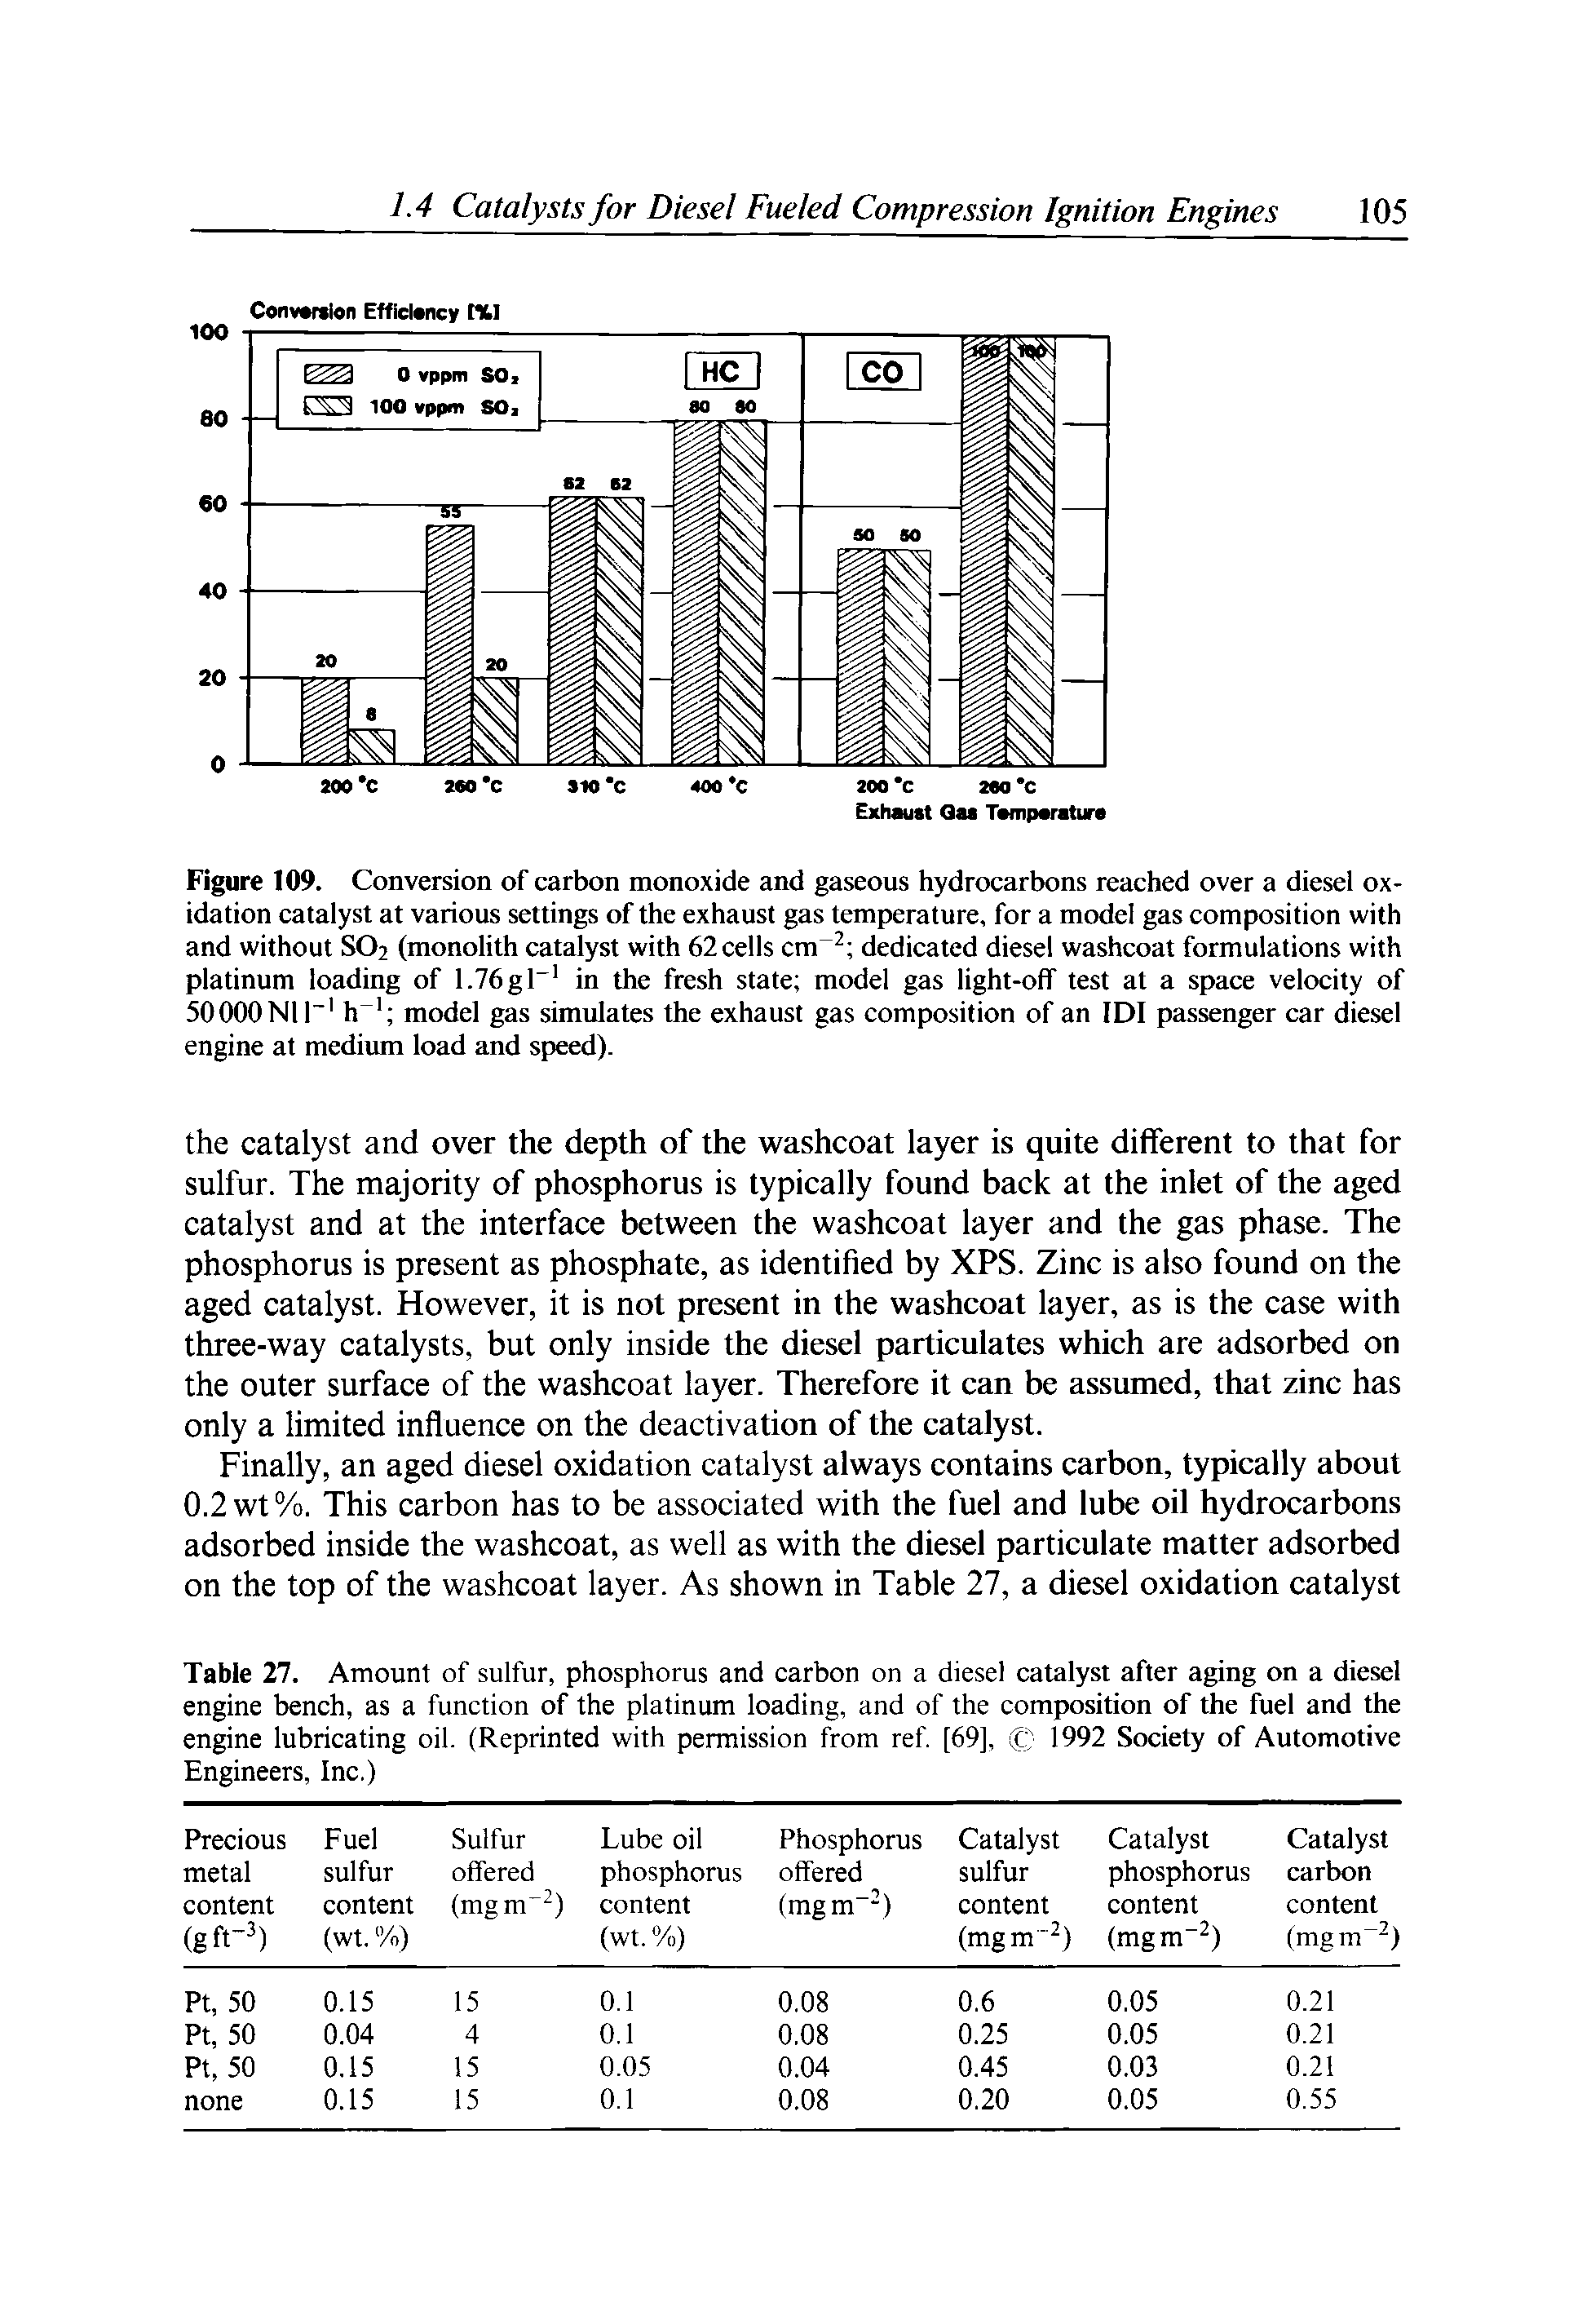 Figure 109. Conversion of carbon monoxide and gaseous hydrocarbons reached over a diesel oxidation catalyst at various settings of the exhaust gas temperature, for a model gas composition with and without SO2 (monolith catalyst with 62cells cm dedicated diesel washcoat formulations with platinum loading of 1.76gl" in the fresh state model gas light-off test at a space velocity of 50000Nir h model gas simulates the exhaust gas composition of an IDI passenger car diesel engine at medium load and speed).